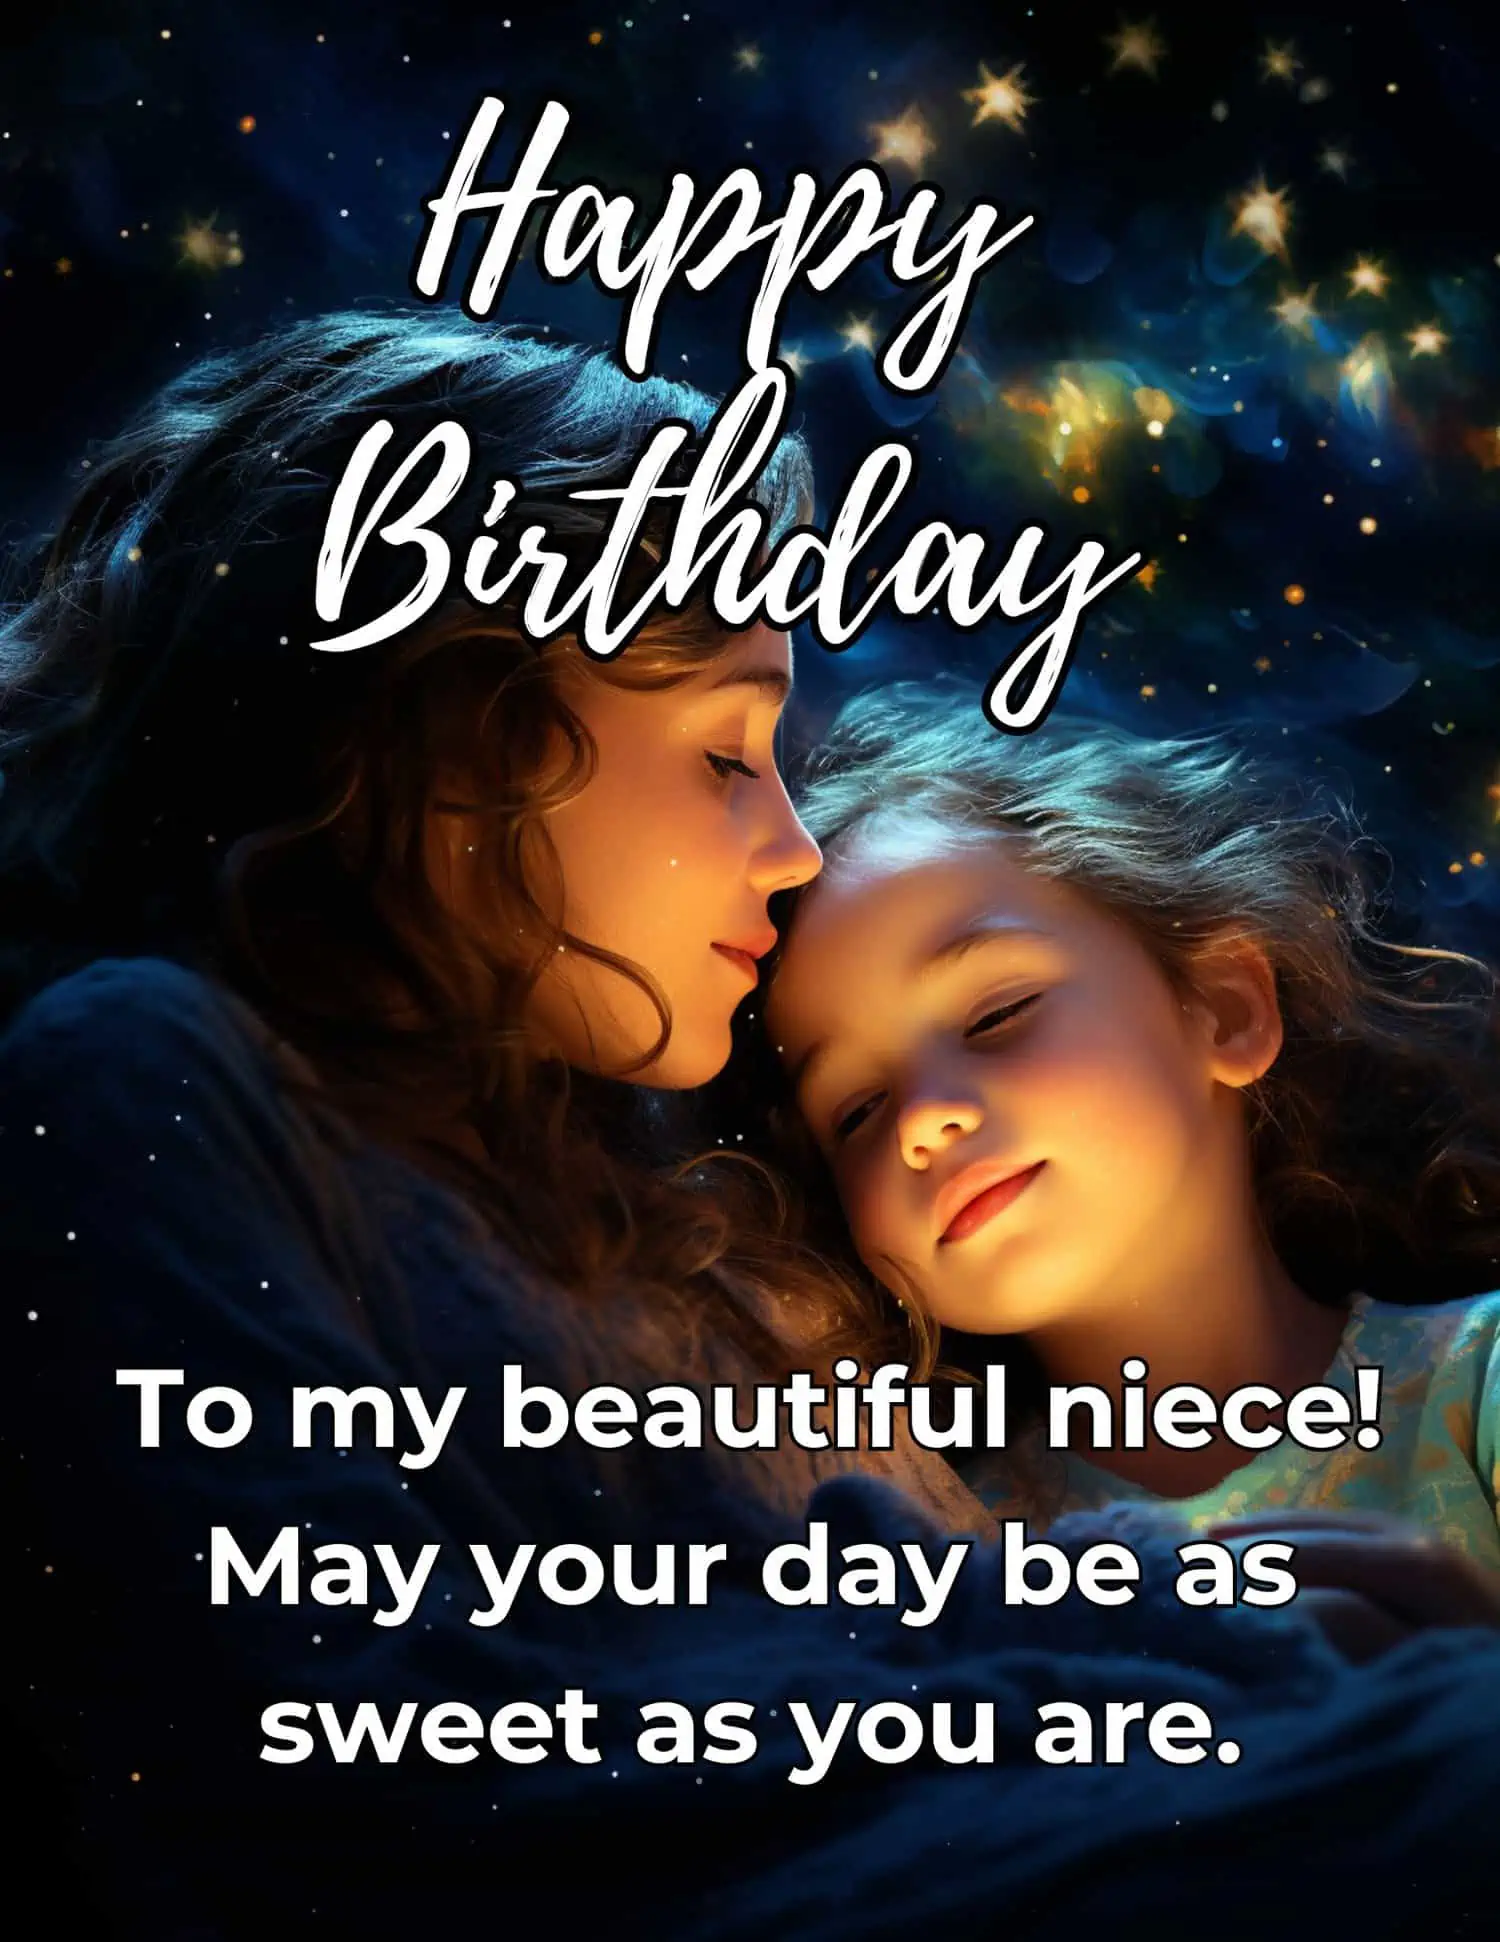 A collection of loving and thoughtful birthday wishes from an aunt to her cherished niece.